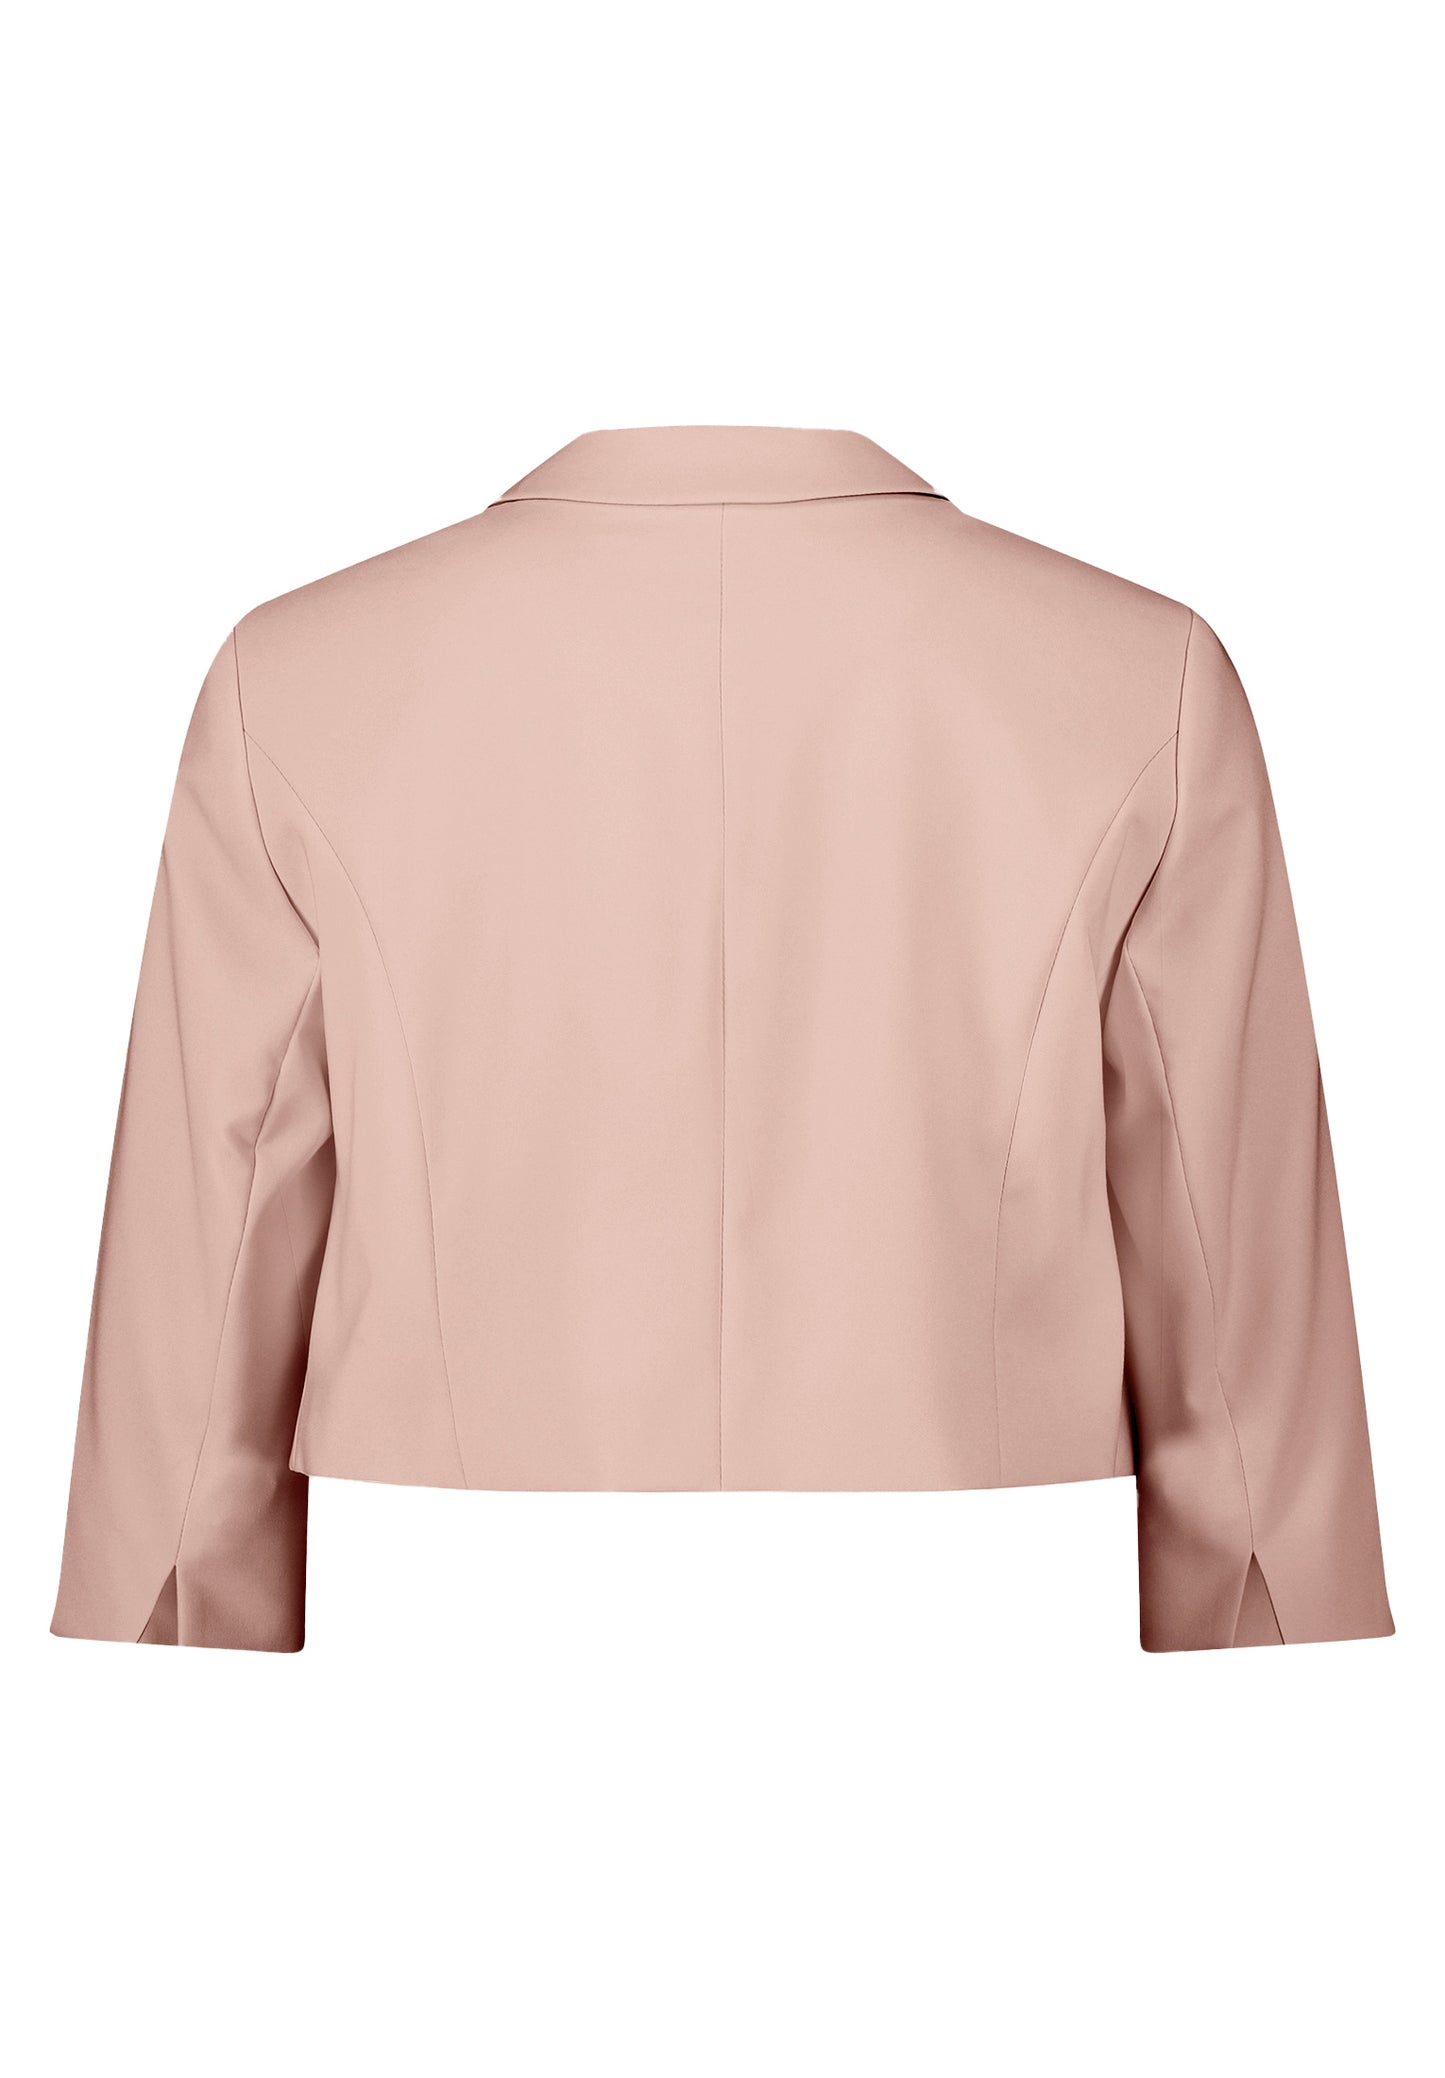 Betty Barclay Pale Pink Cropped Jacket 4350/1080